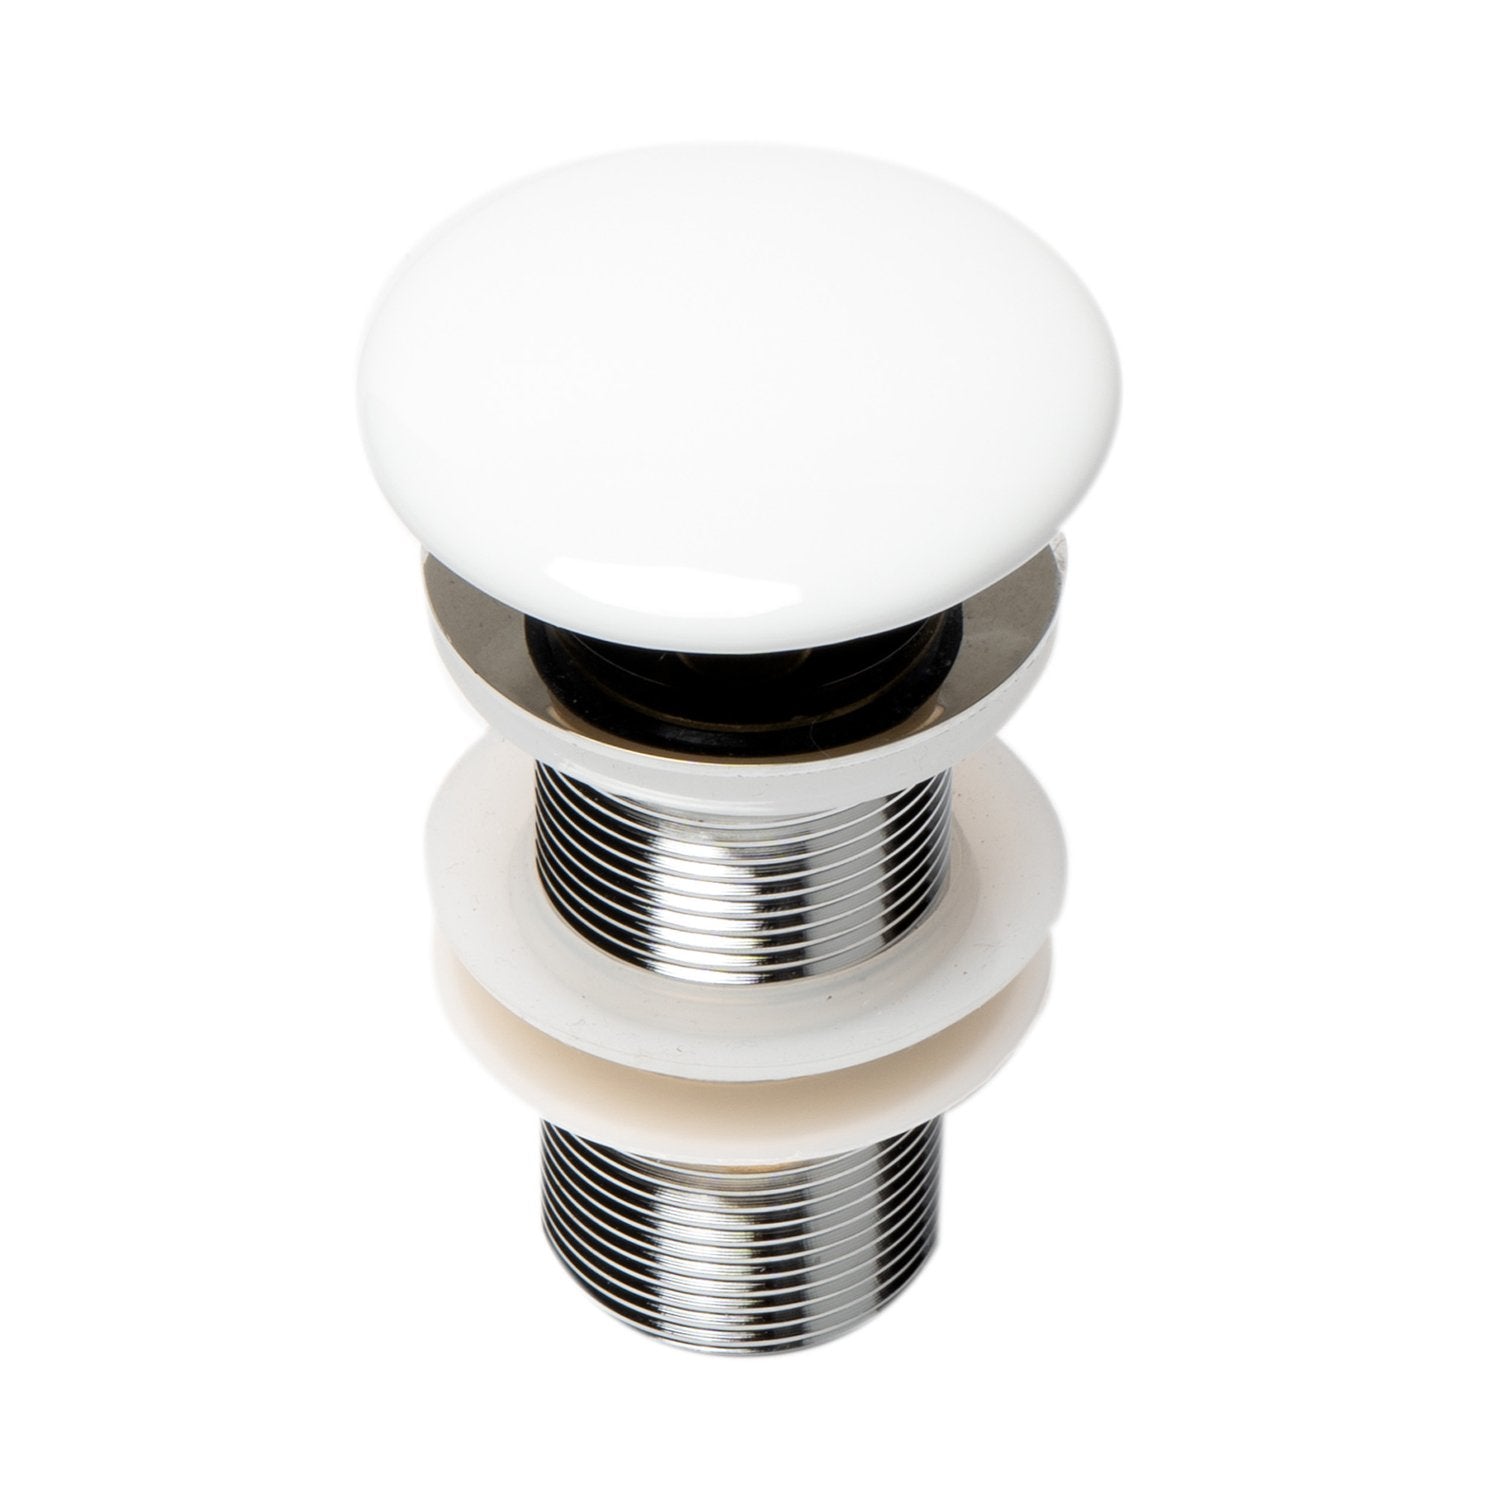 ALFI AB8055 Ceramic Mushroom Top Pop Up Drain for Sinks without Overflow